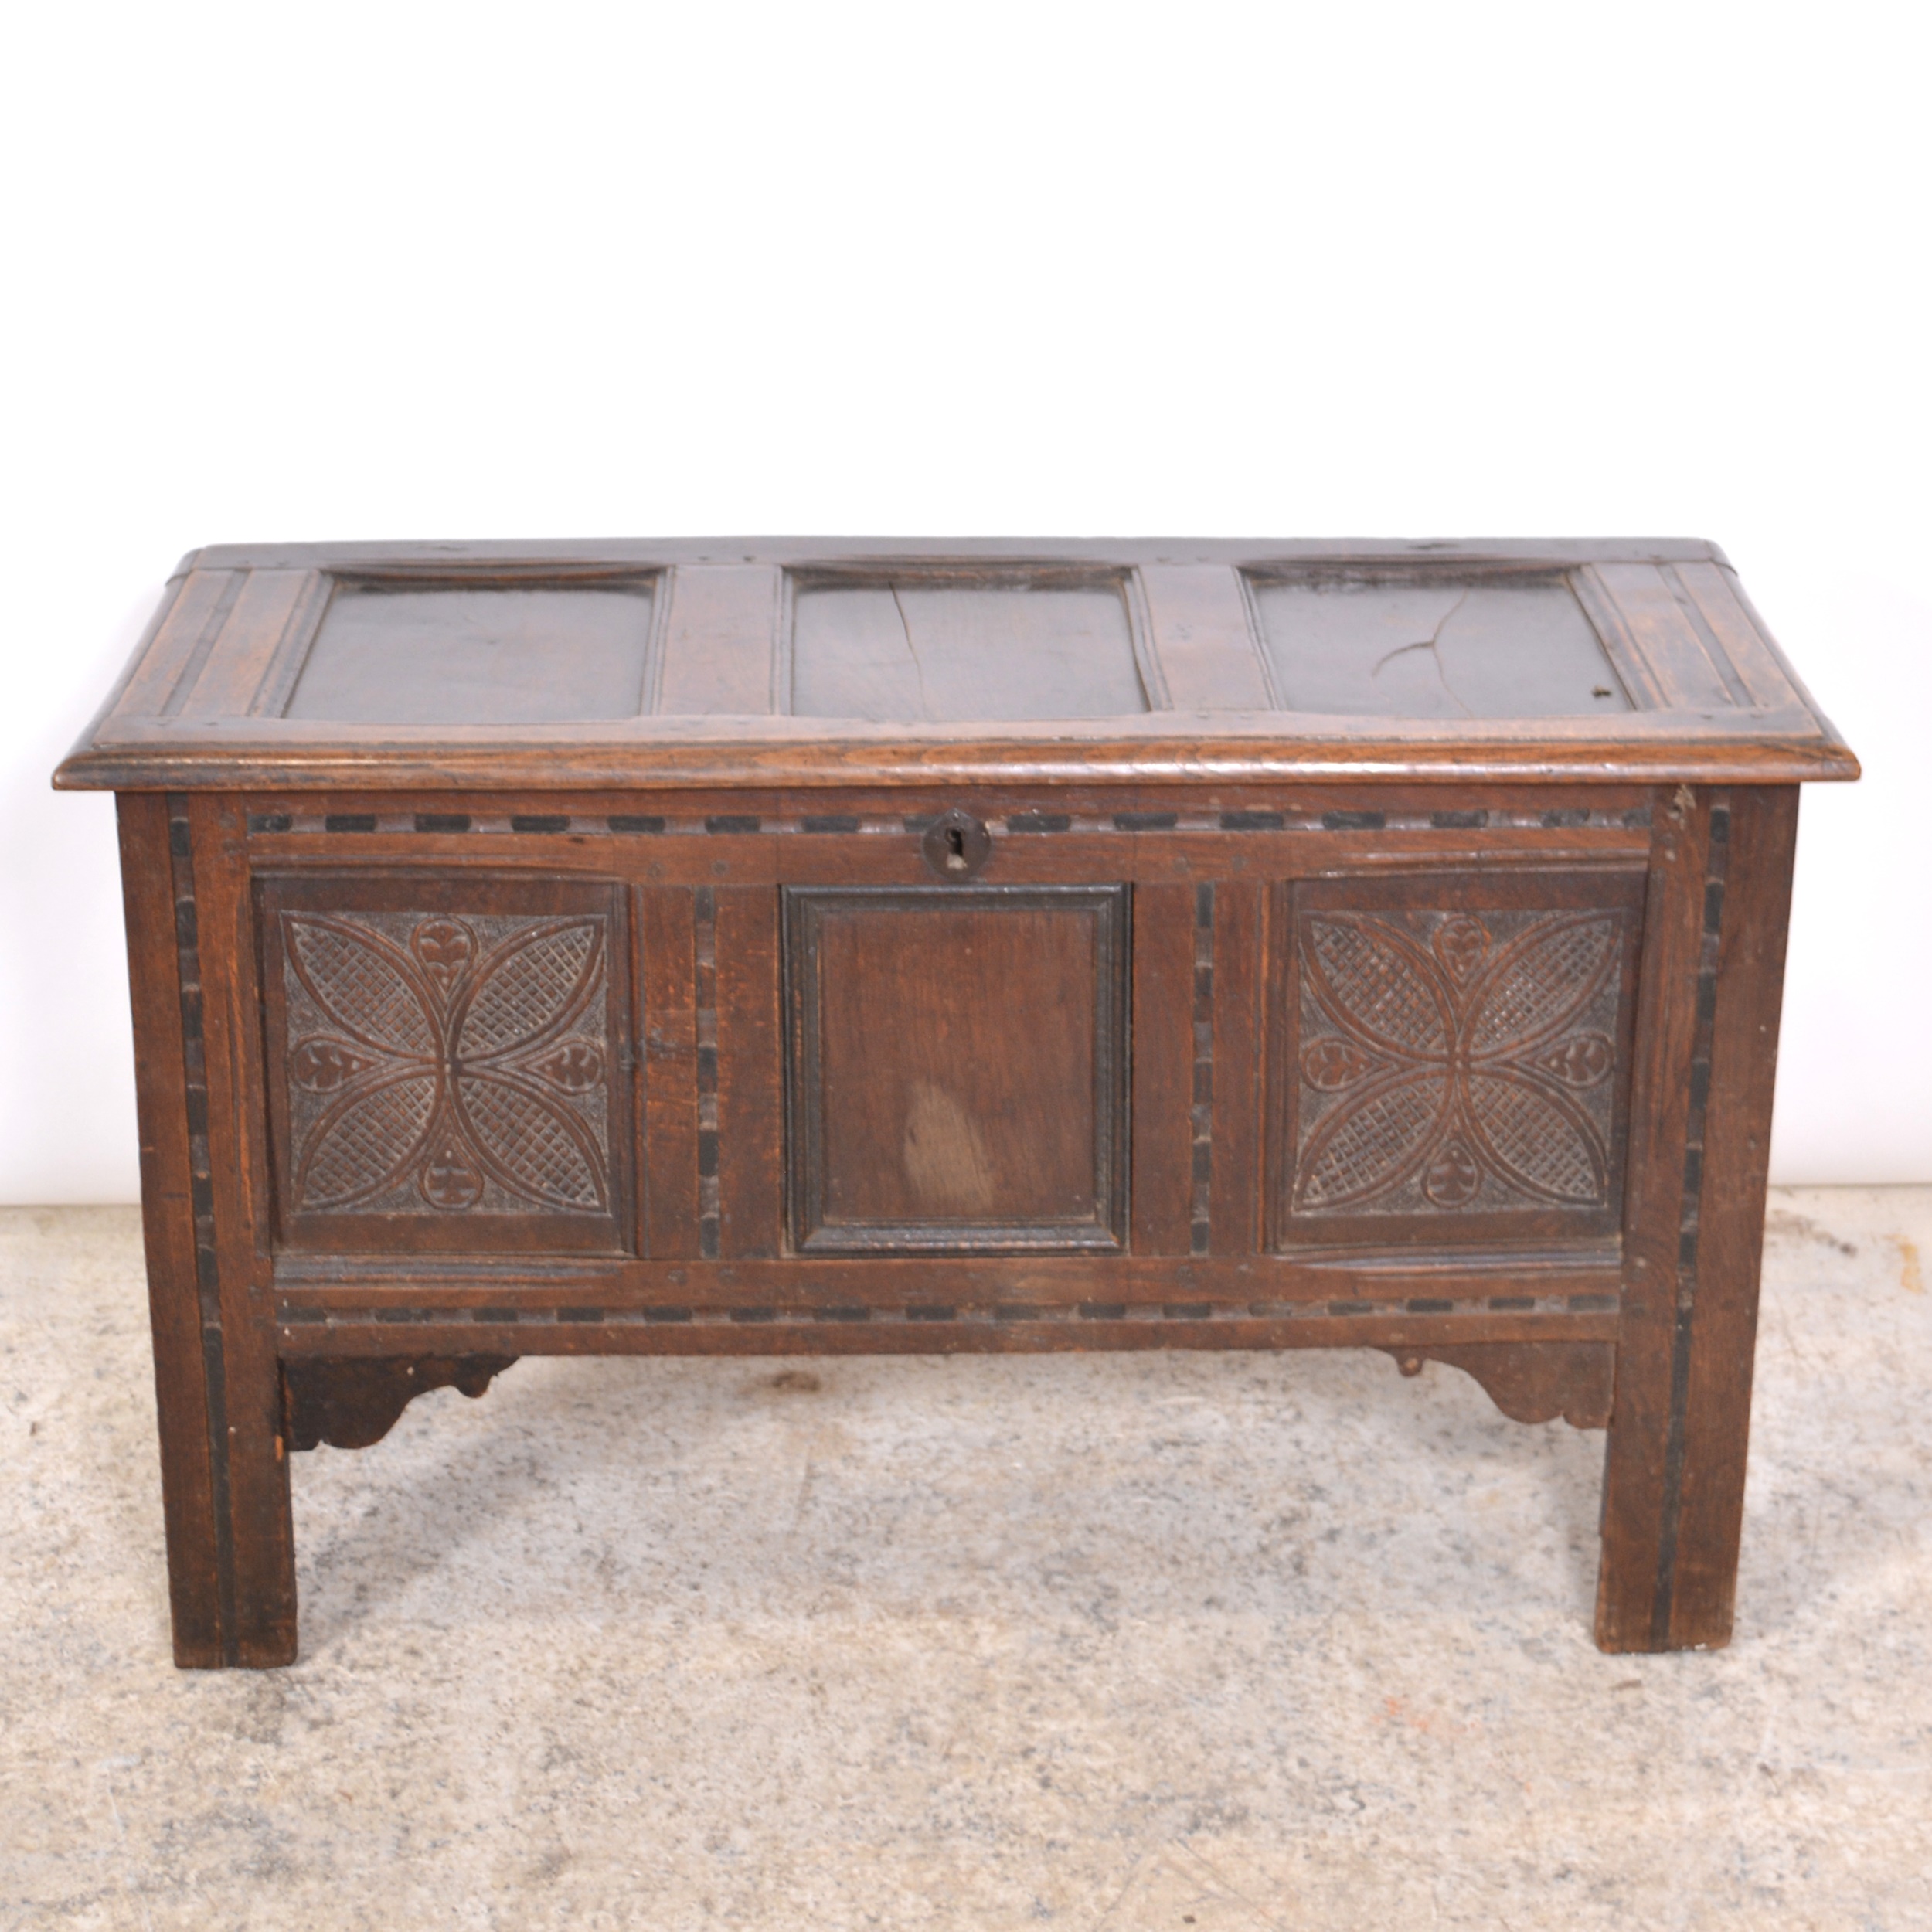 Joined oak coffer, 18th Century - Image 2 of 2